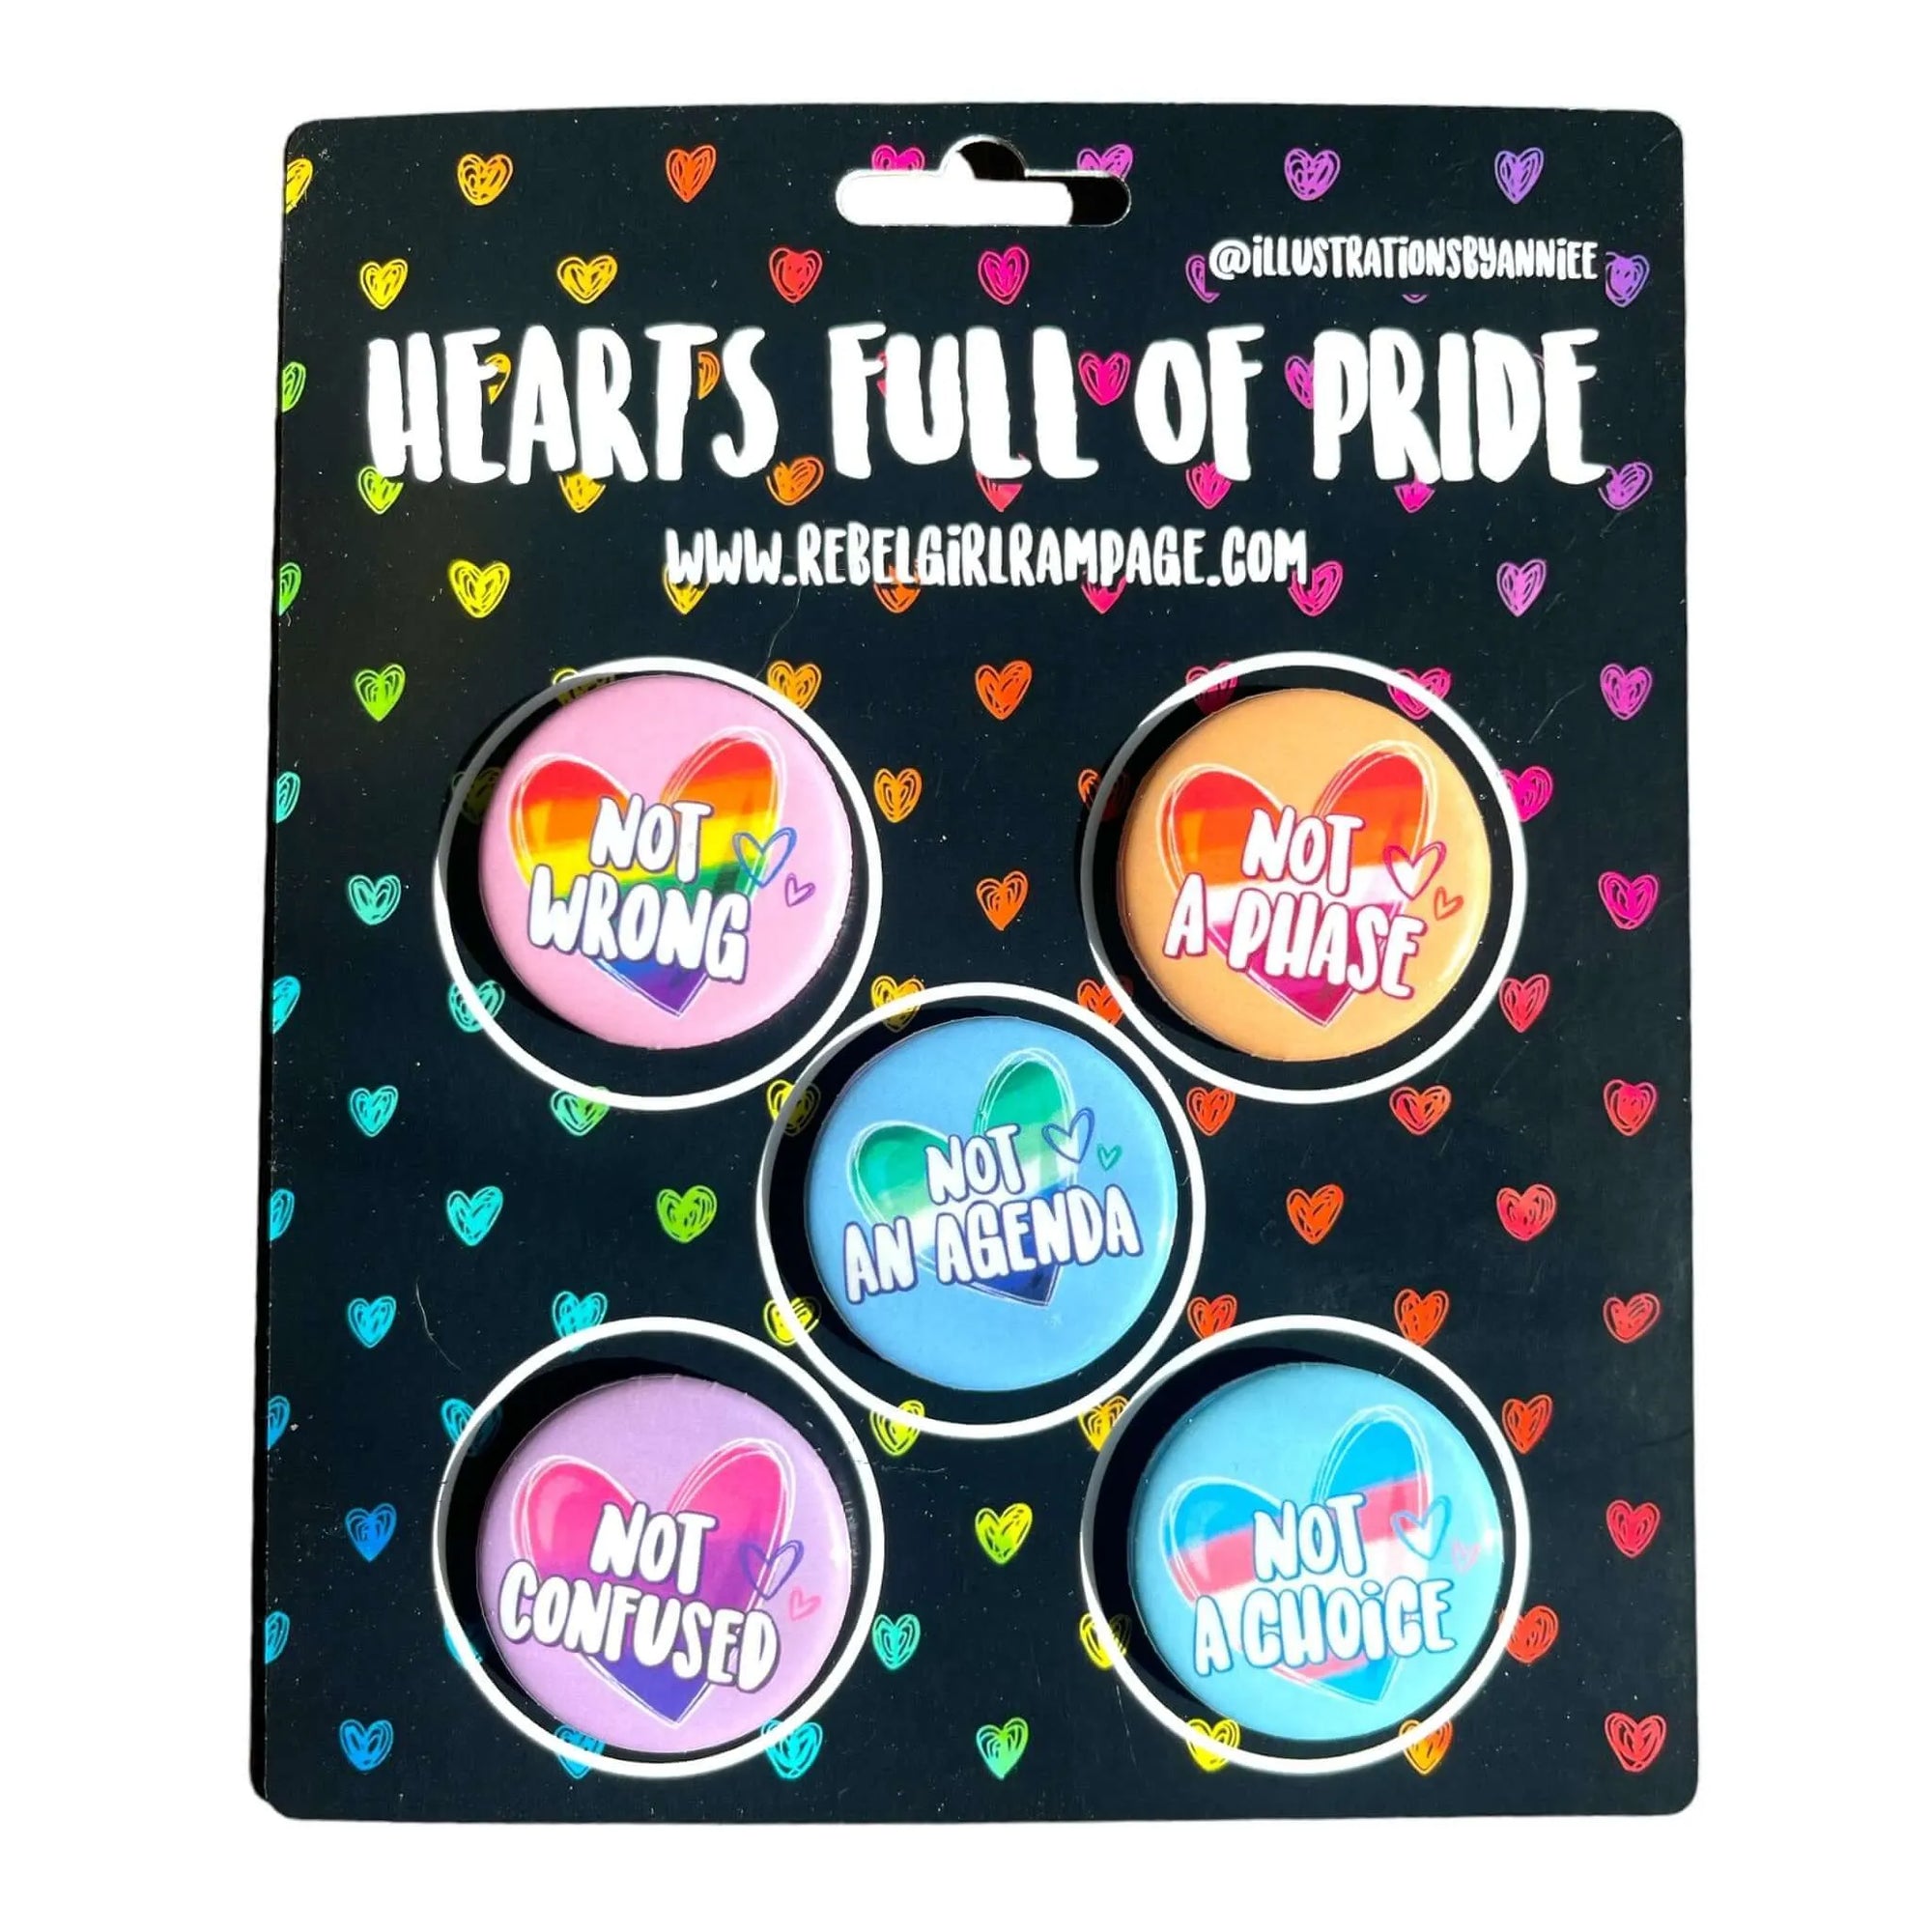 Hearts Full Of Pride Button Pack